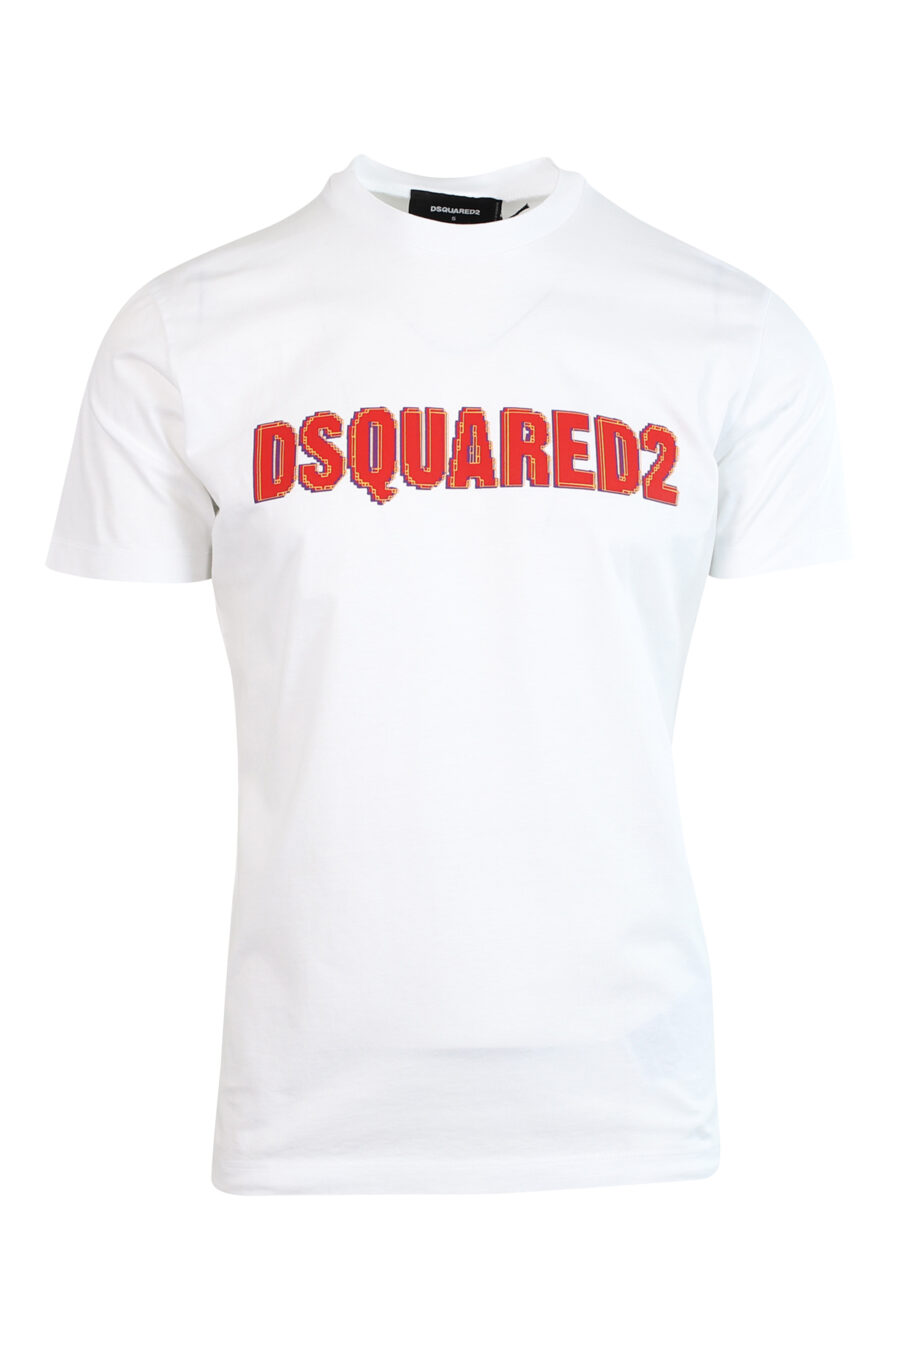 White T-shirt with red logo - 8052134945995